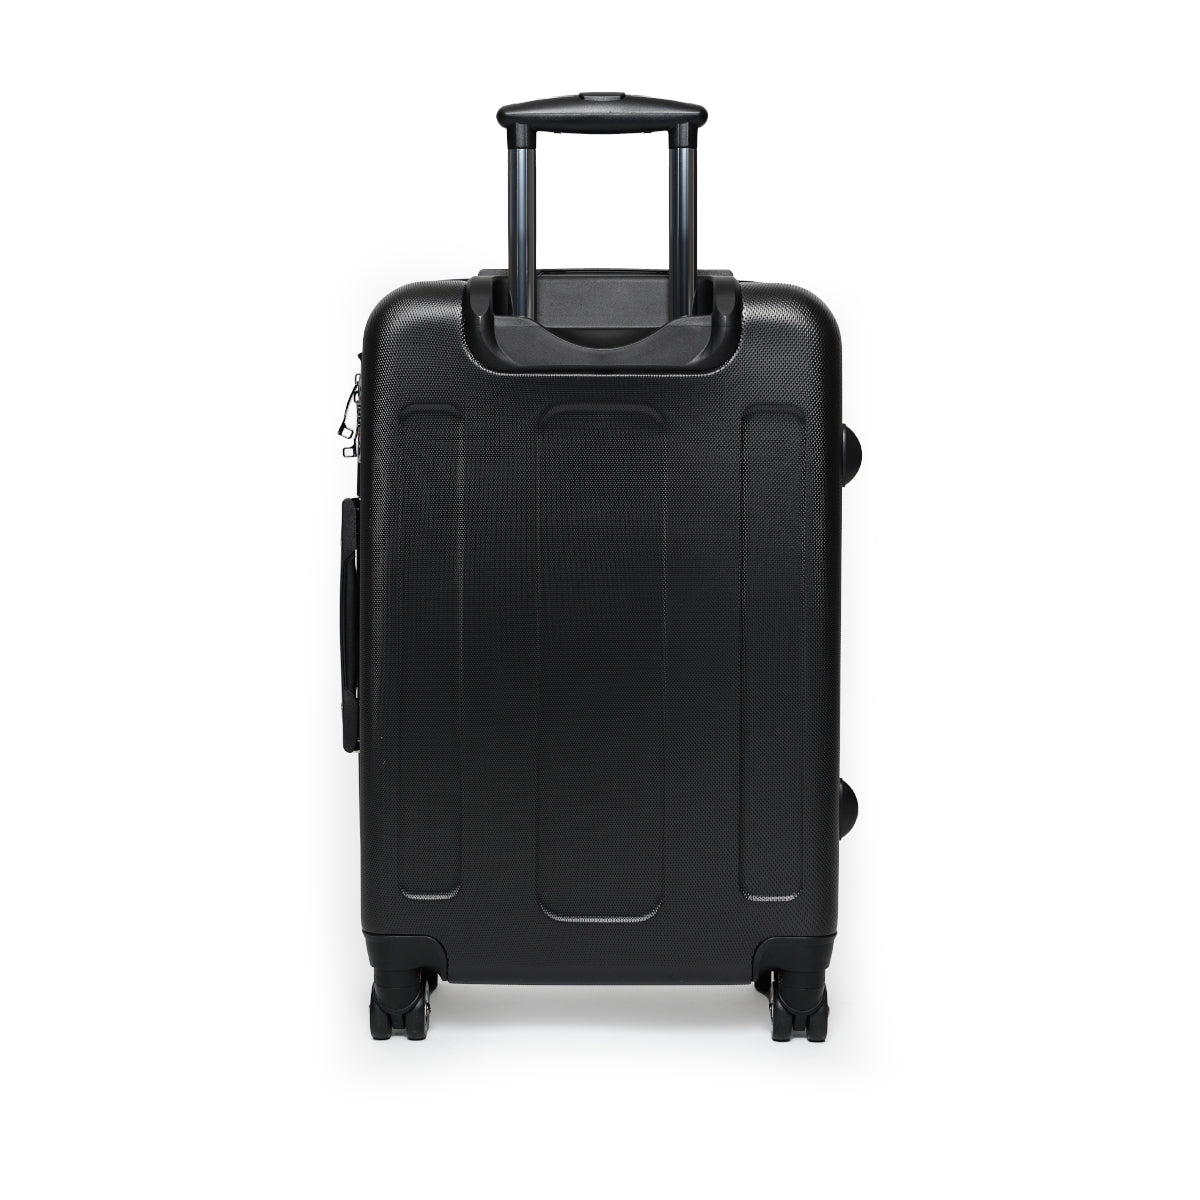 Getrott Cardi B Invasion of Privacy Black Cabin Suitcase Inner Pockets Extended Storage Adjustable Telescopic Handle Inner Pockets Double wheeled Polycarbonate Hard-shell Built-in Lock